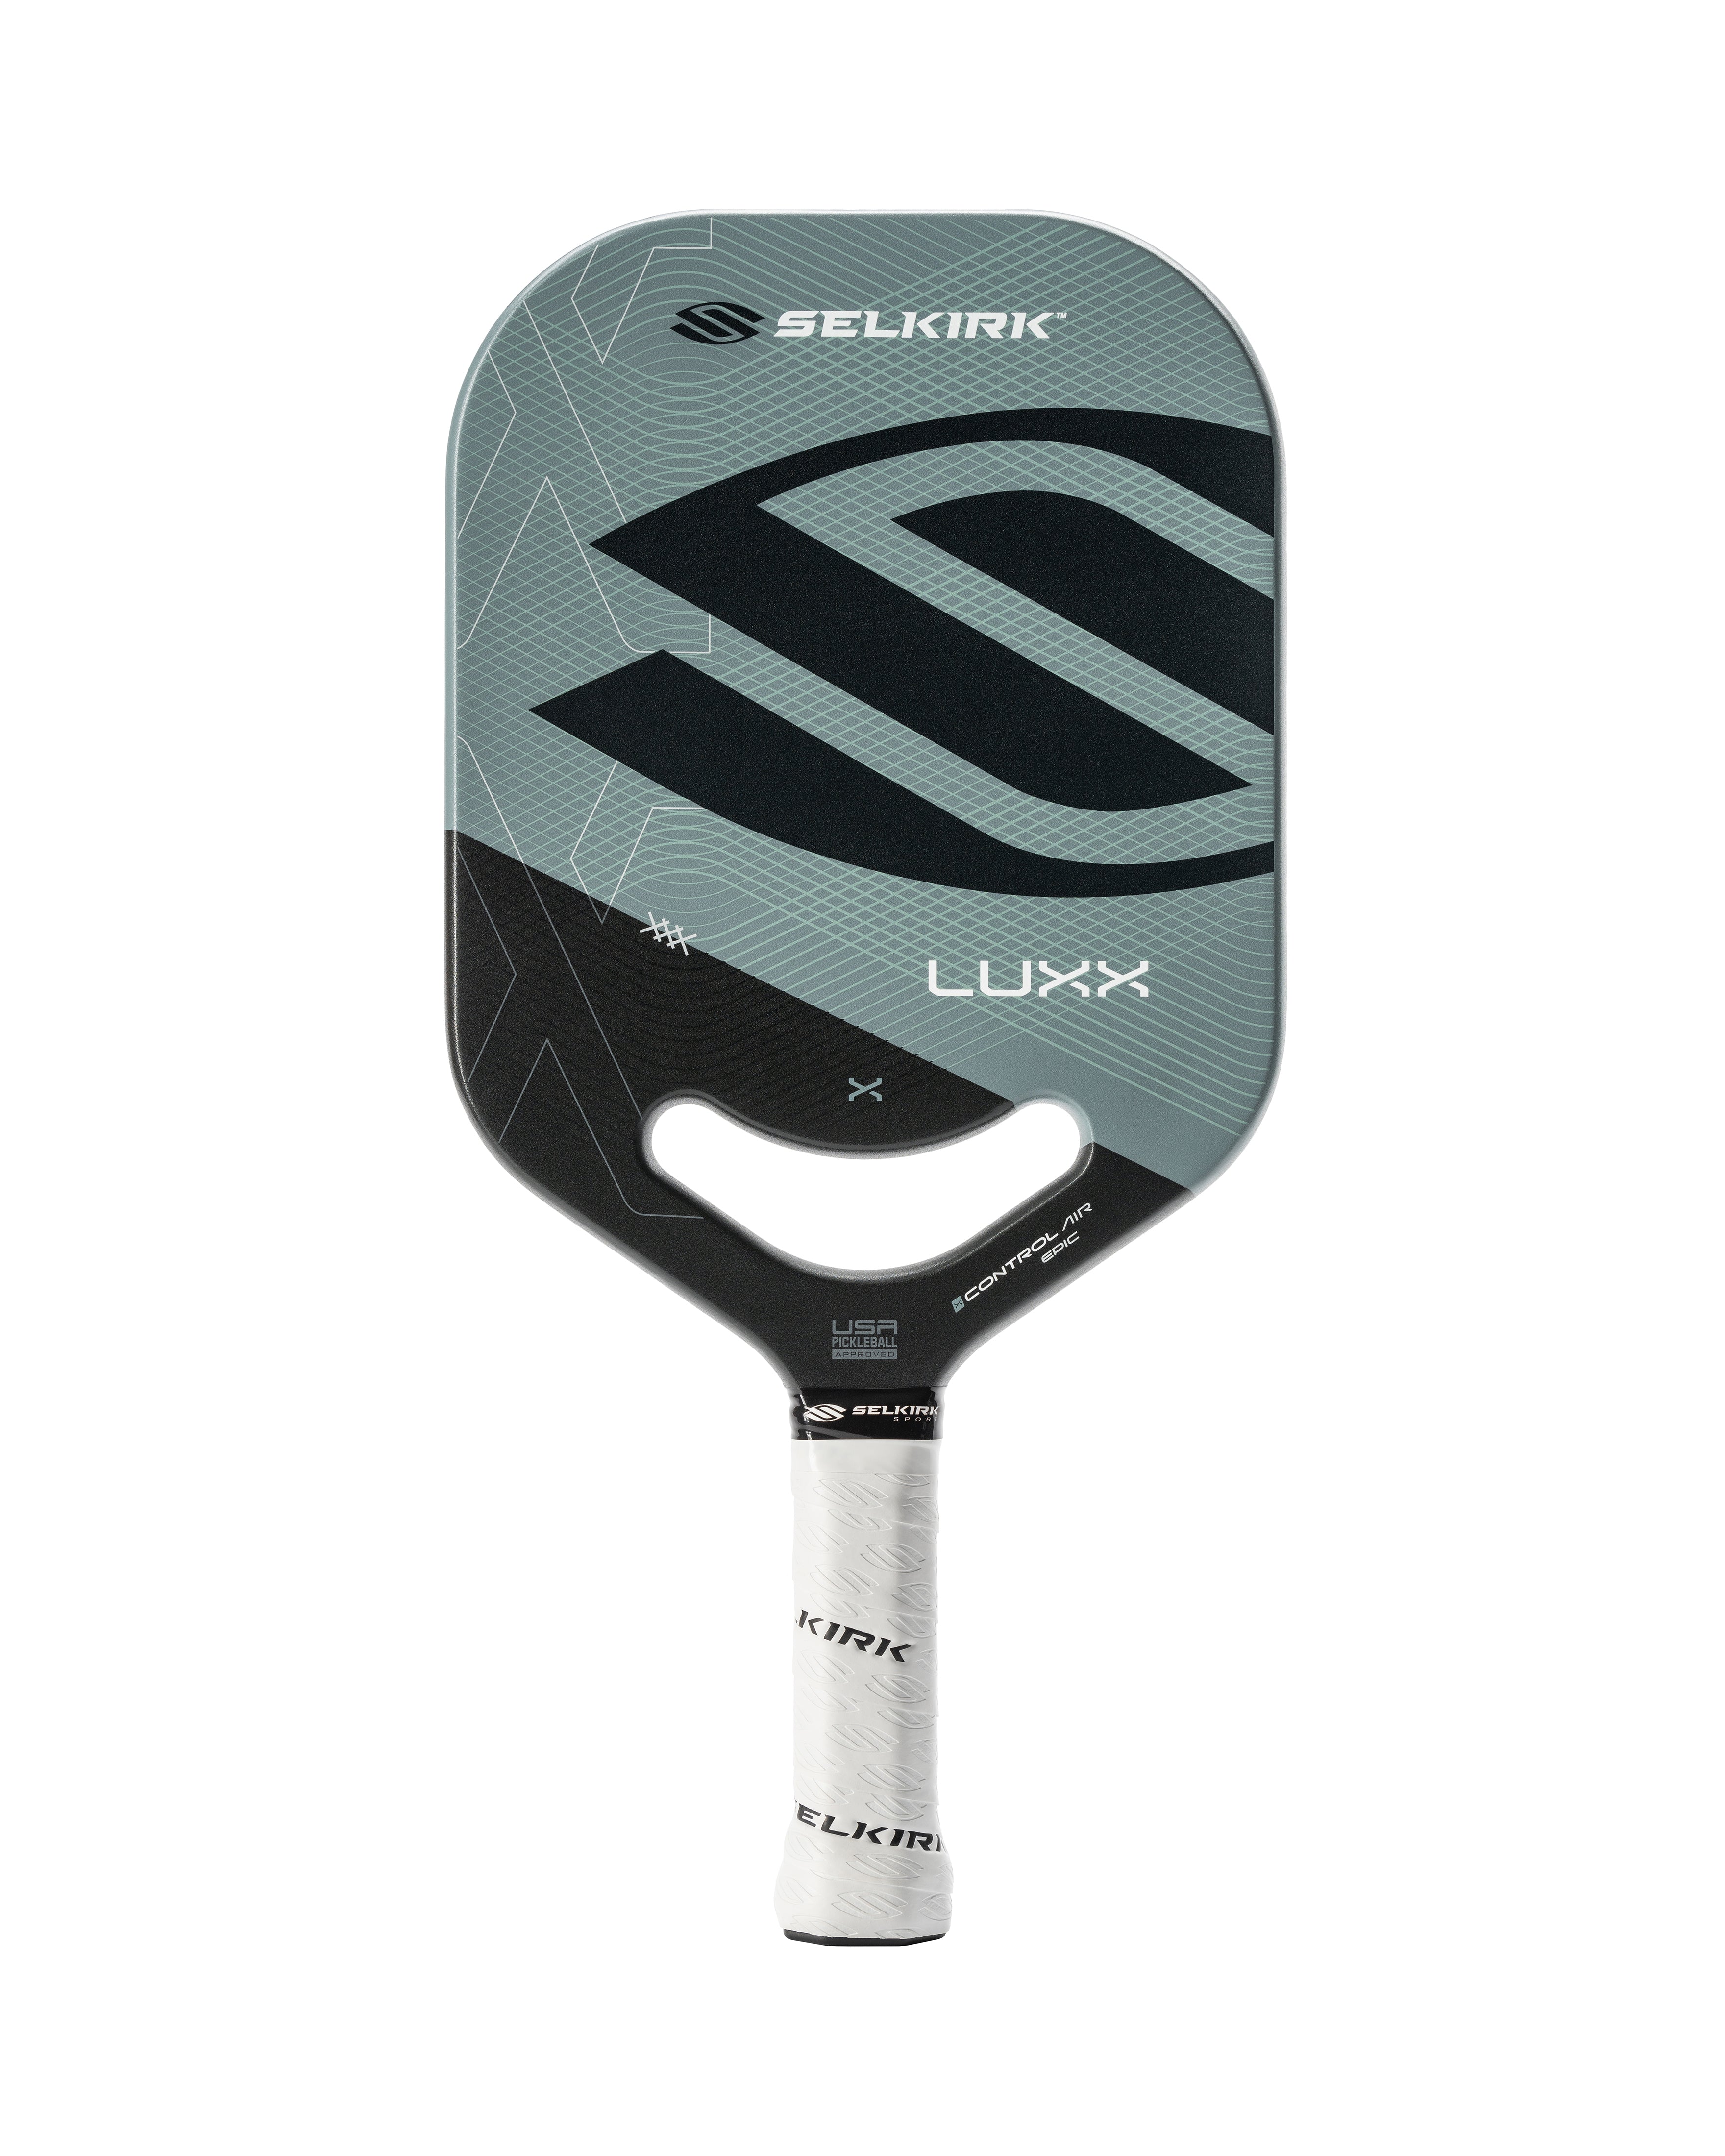 The Selkirk Luxx Control Air Epic pickleball paddle, in partnership with Rhone, is the ultimate control paddle for balanced pickleball players. 